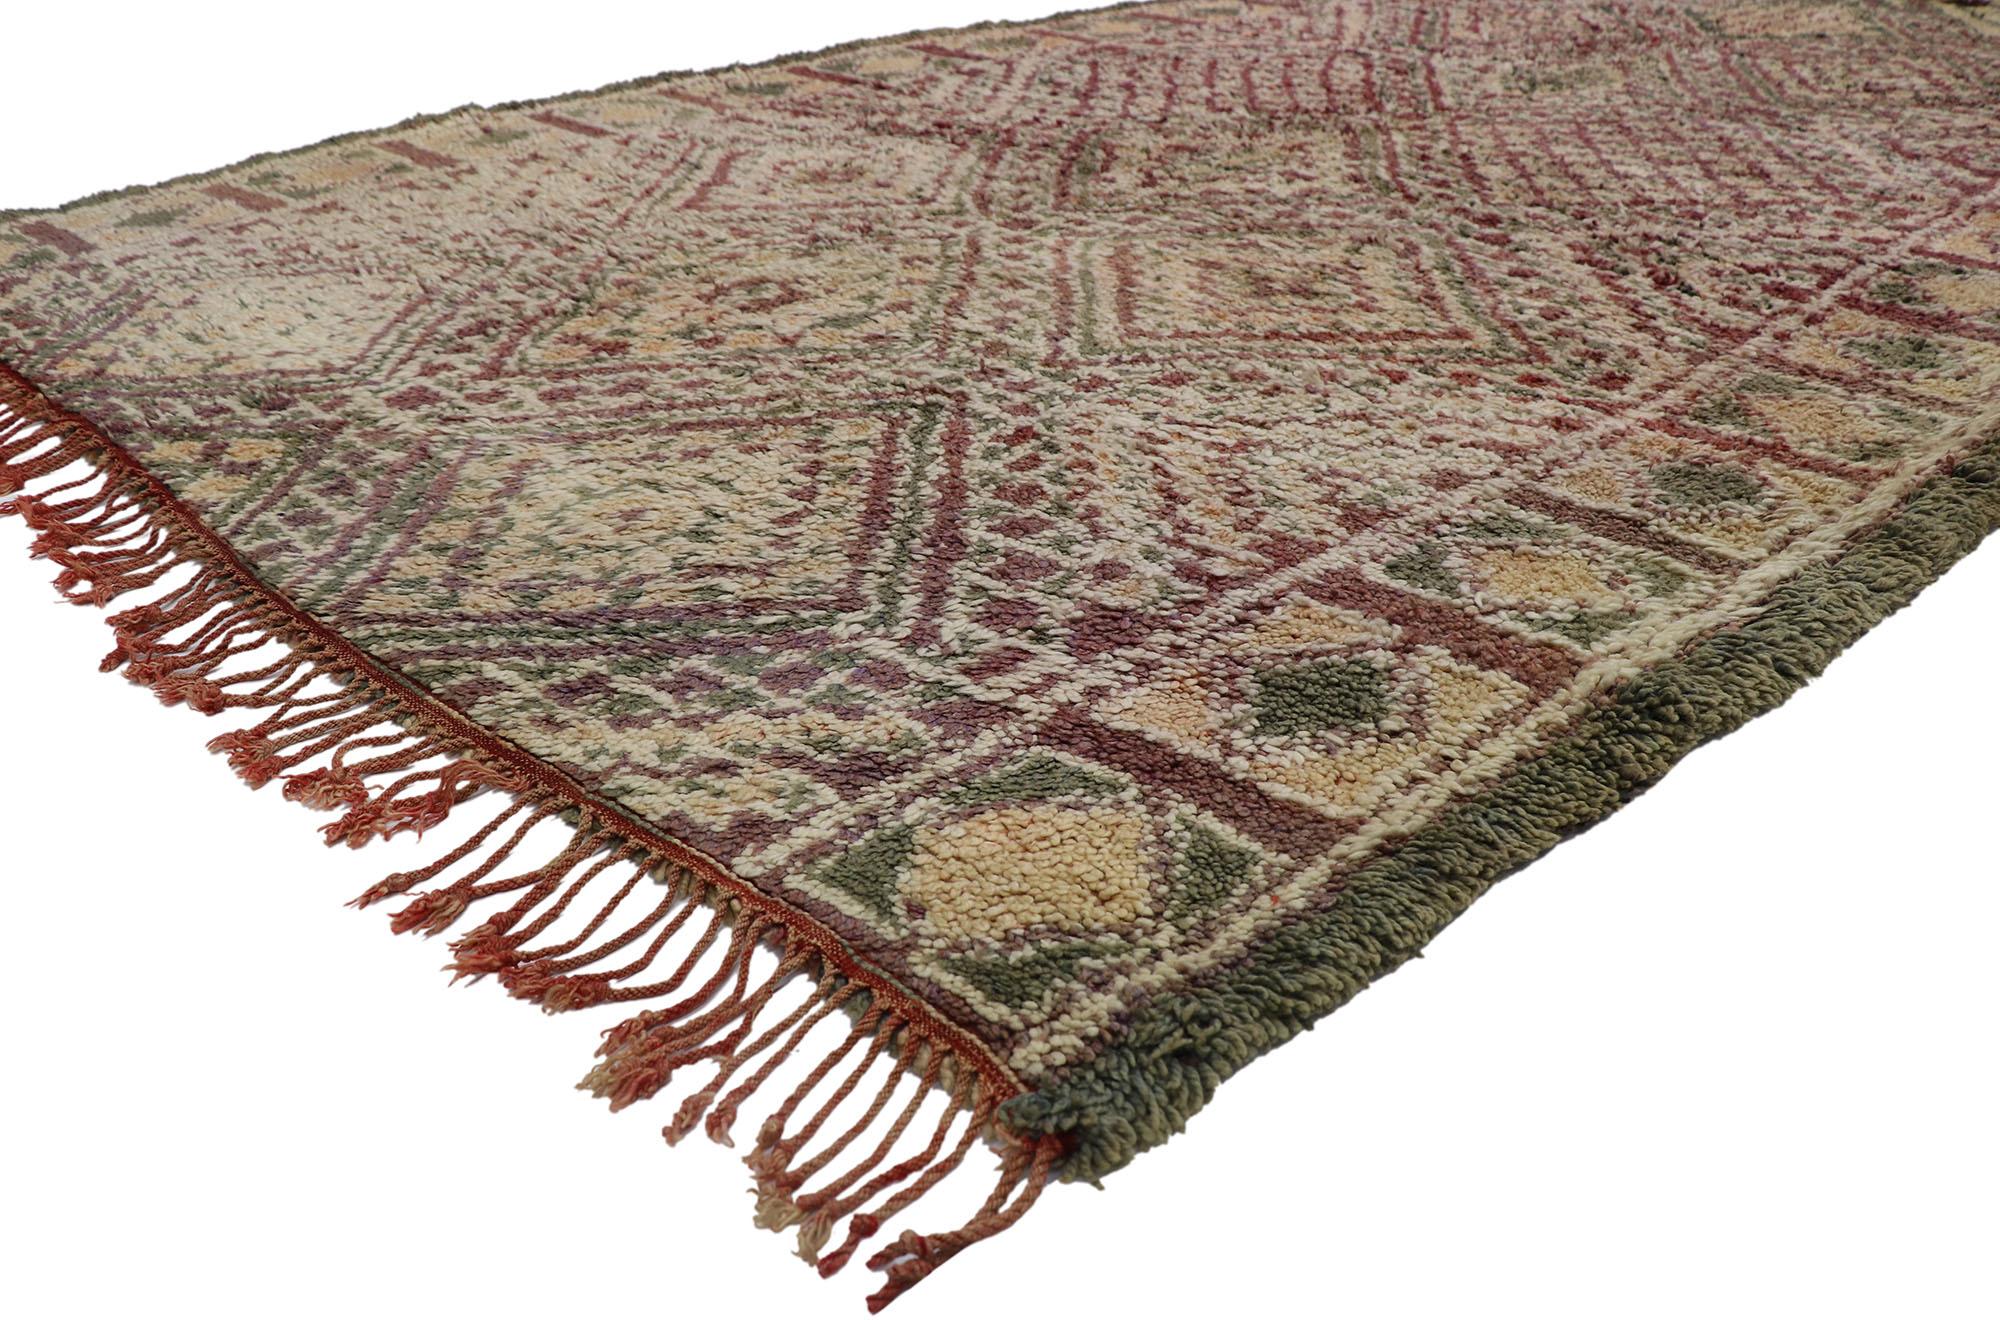 21234 Vintage Berber Zayane Moroccan rug with Bohemian Style 07'03 x 12'11. Showcasing a bold expressive design, incredible detail and texture, this hand knotted wool vintage Berber Zayane Moroccan rug is a captivating vision of woven beauty. The